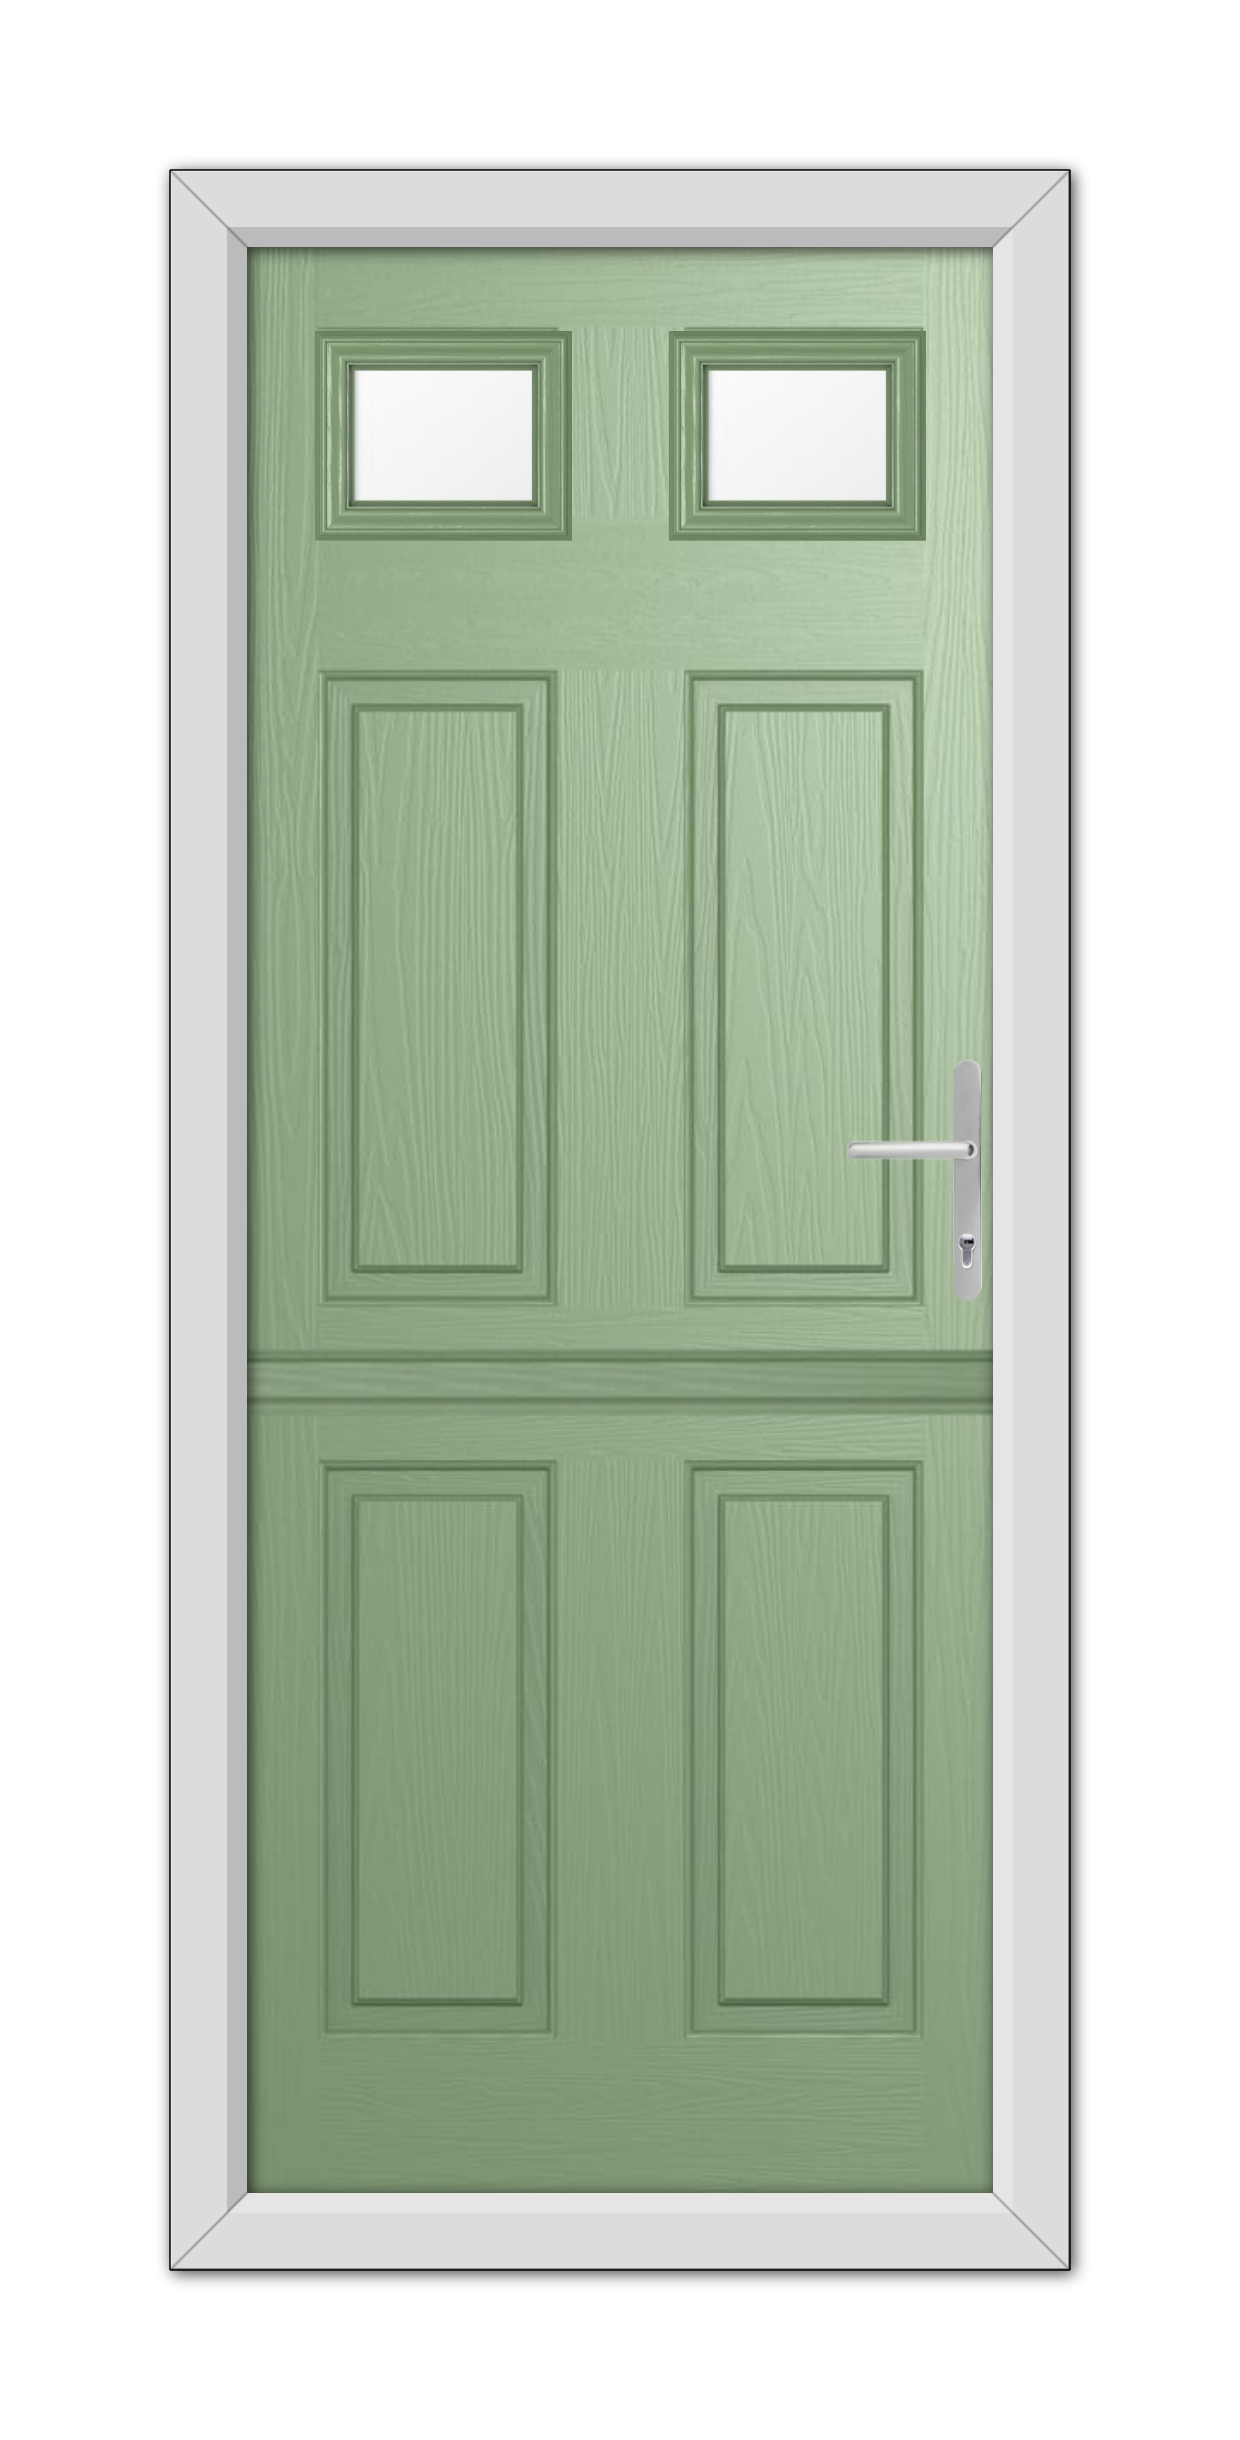 A Chartwell Green Middleton Glazed 2 Stable Composite Door 48mm Timber Core with four panels and three rectangular windows at the top, set in a white frame, with a silver handle on the right.